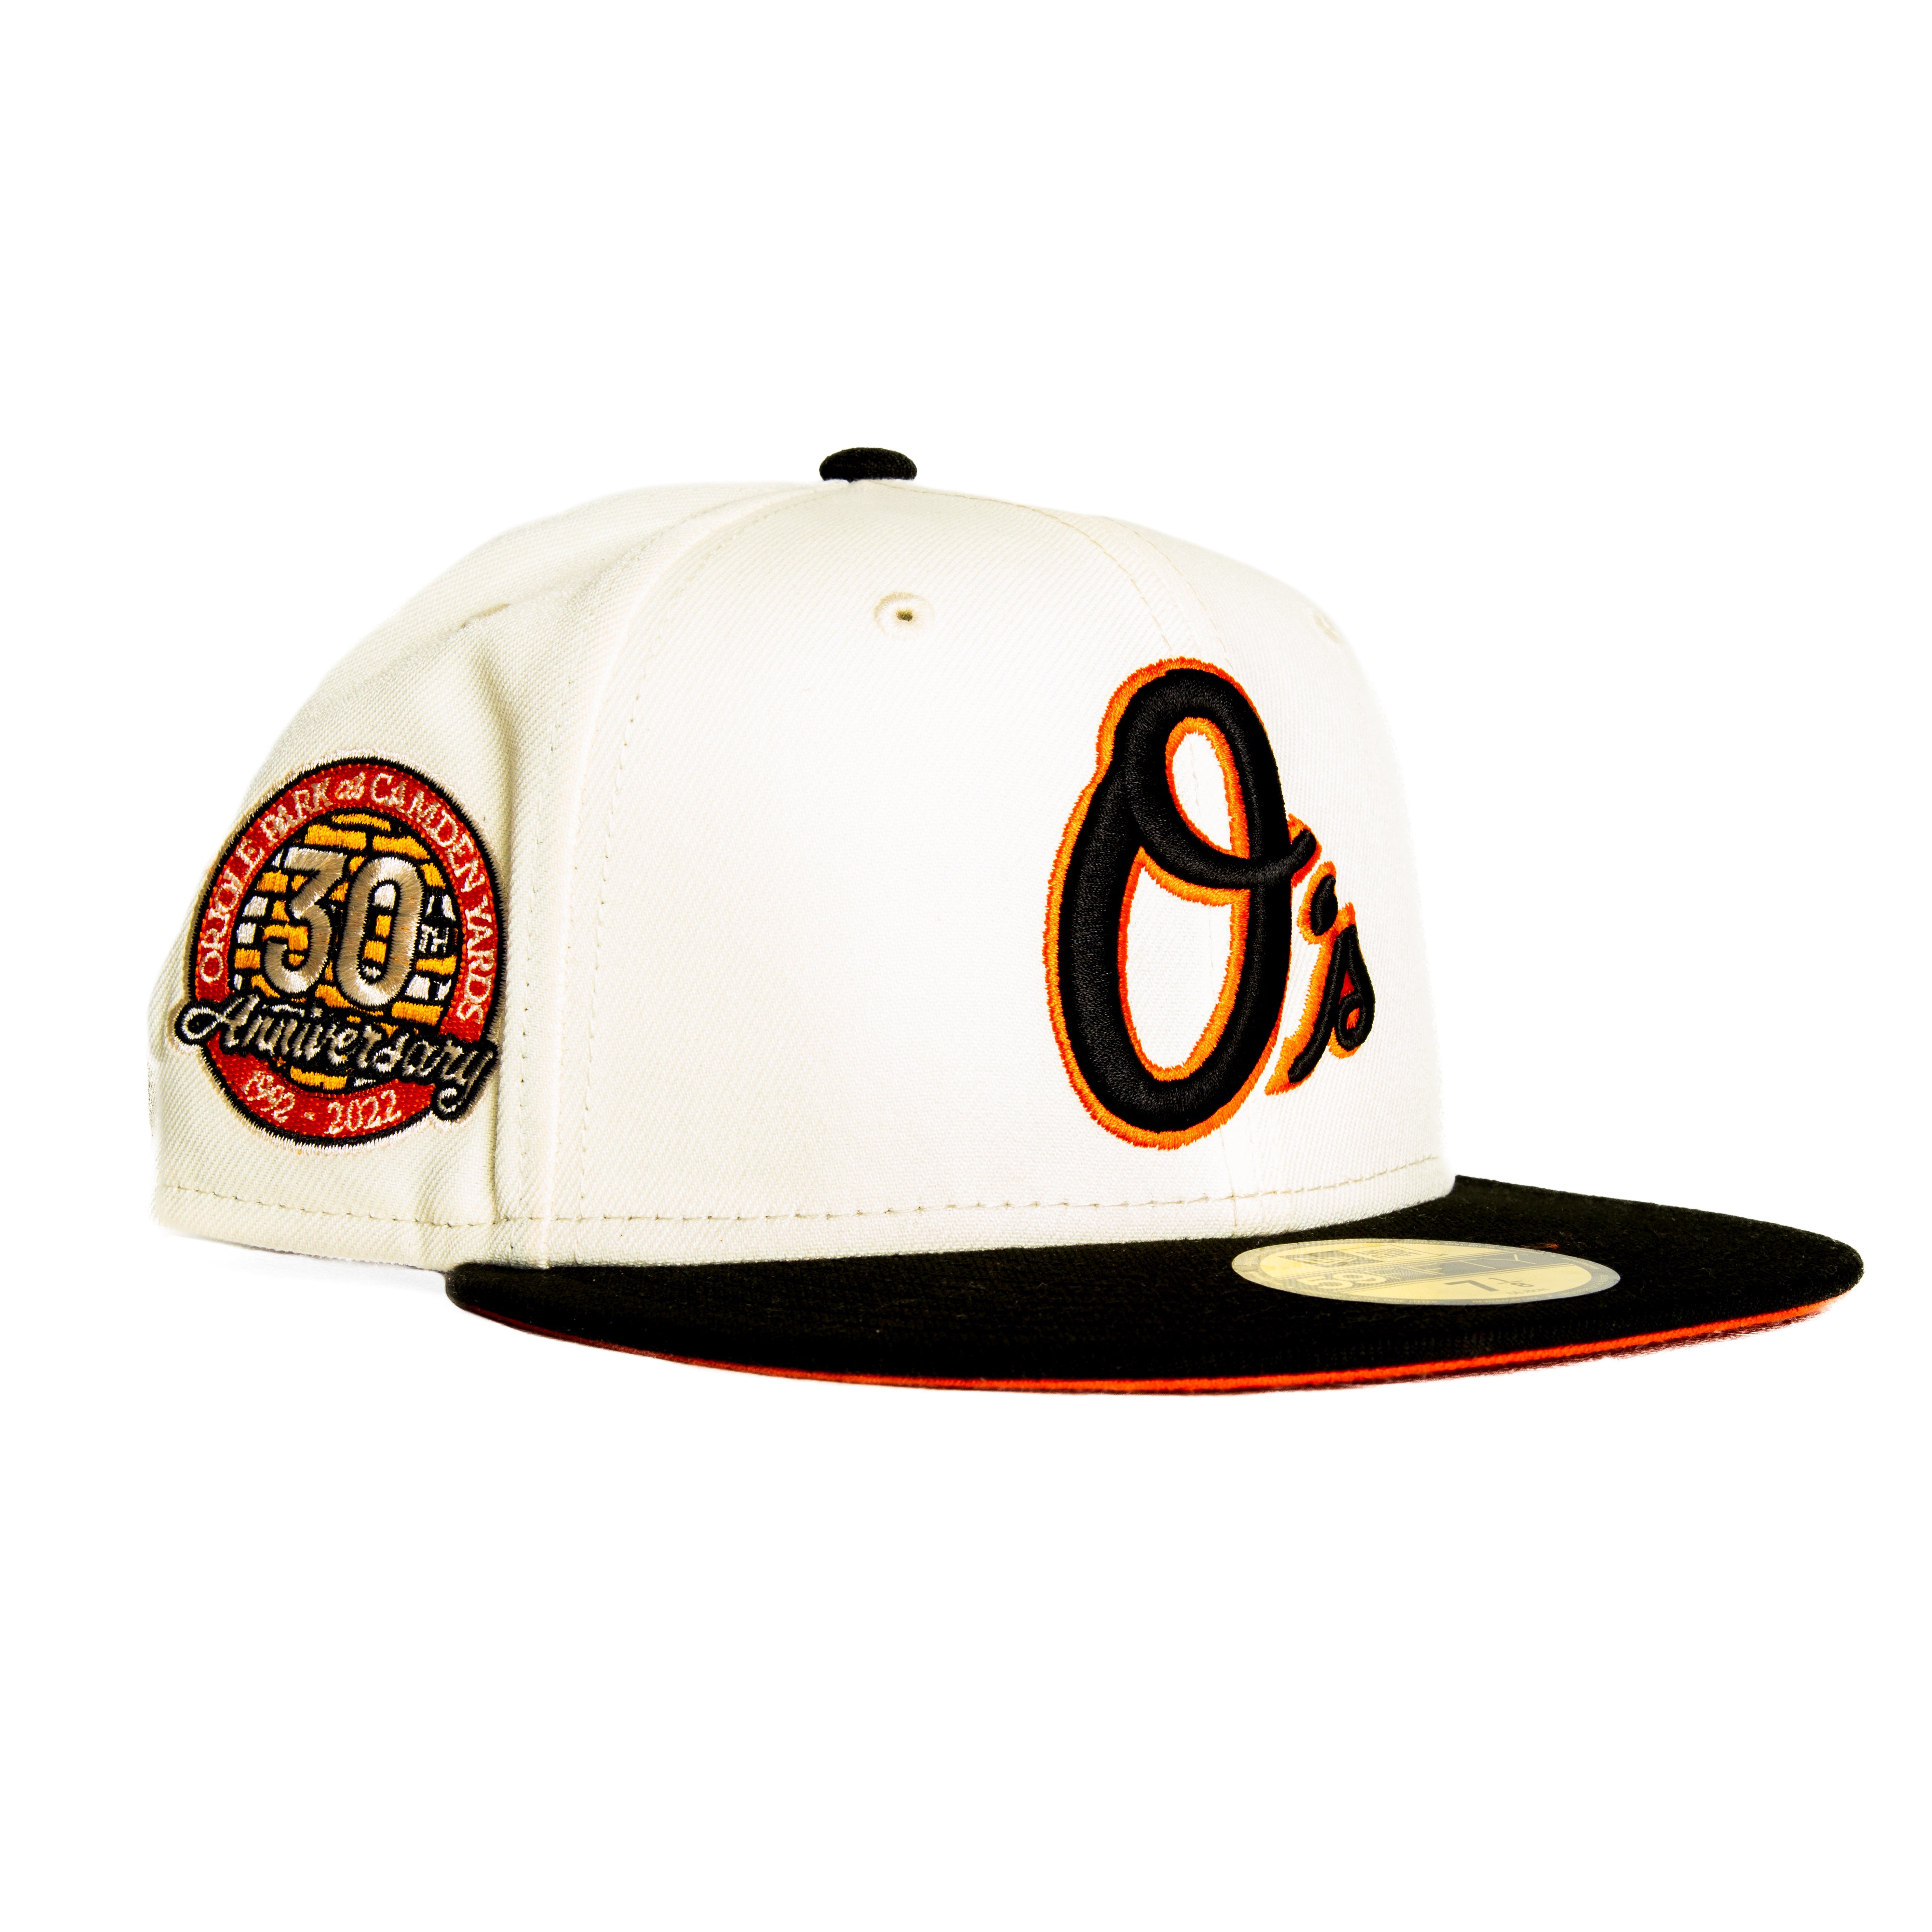 NEW ERA COUNTRY CLUB 2.0 ST. LOUIS BROWNS FITTED HAT (CHROME